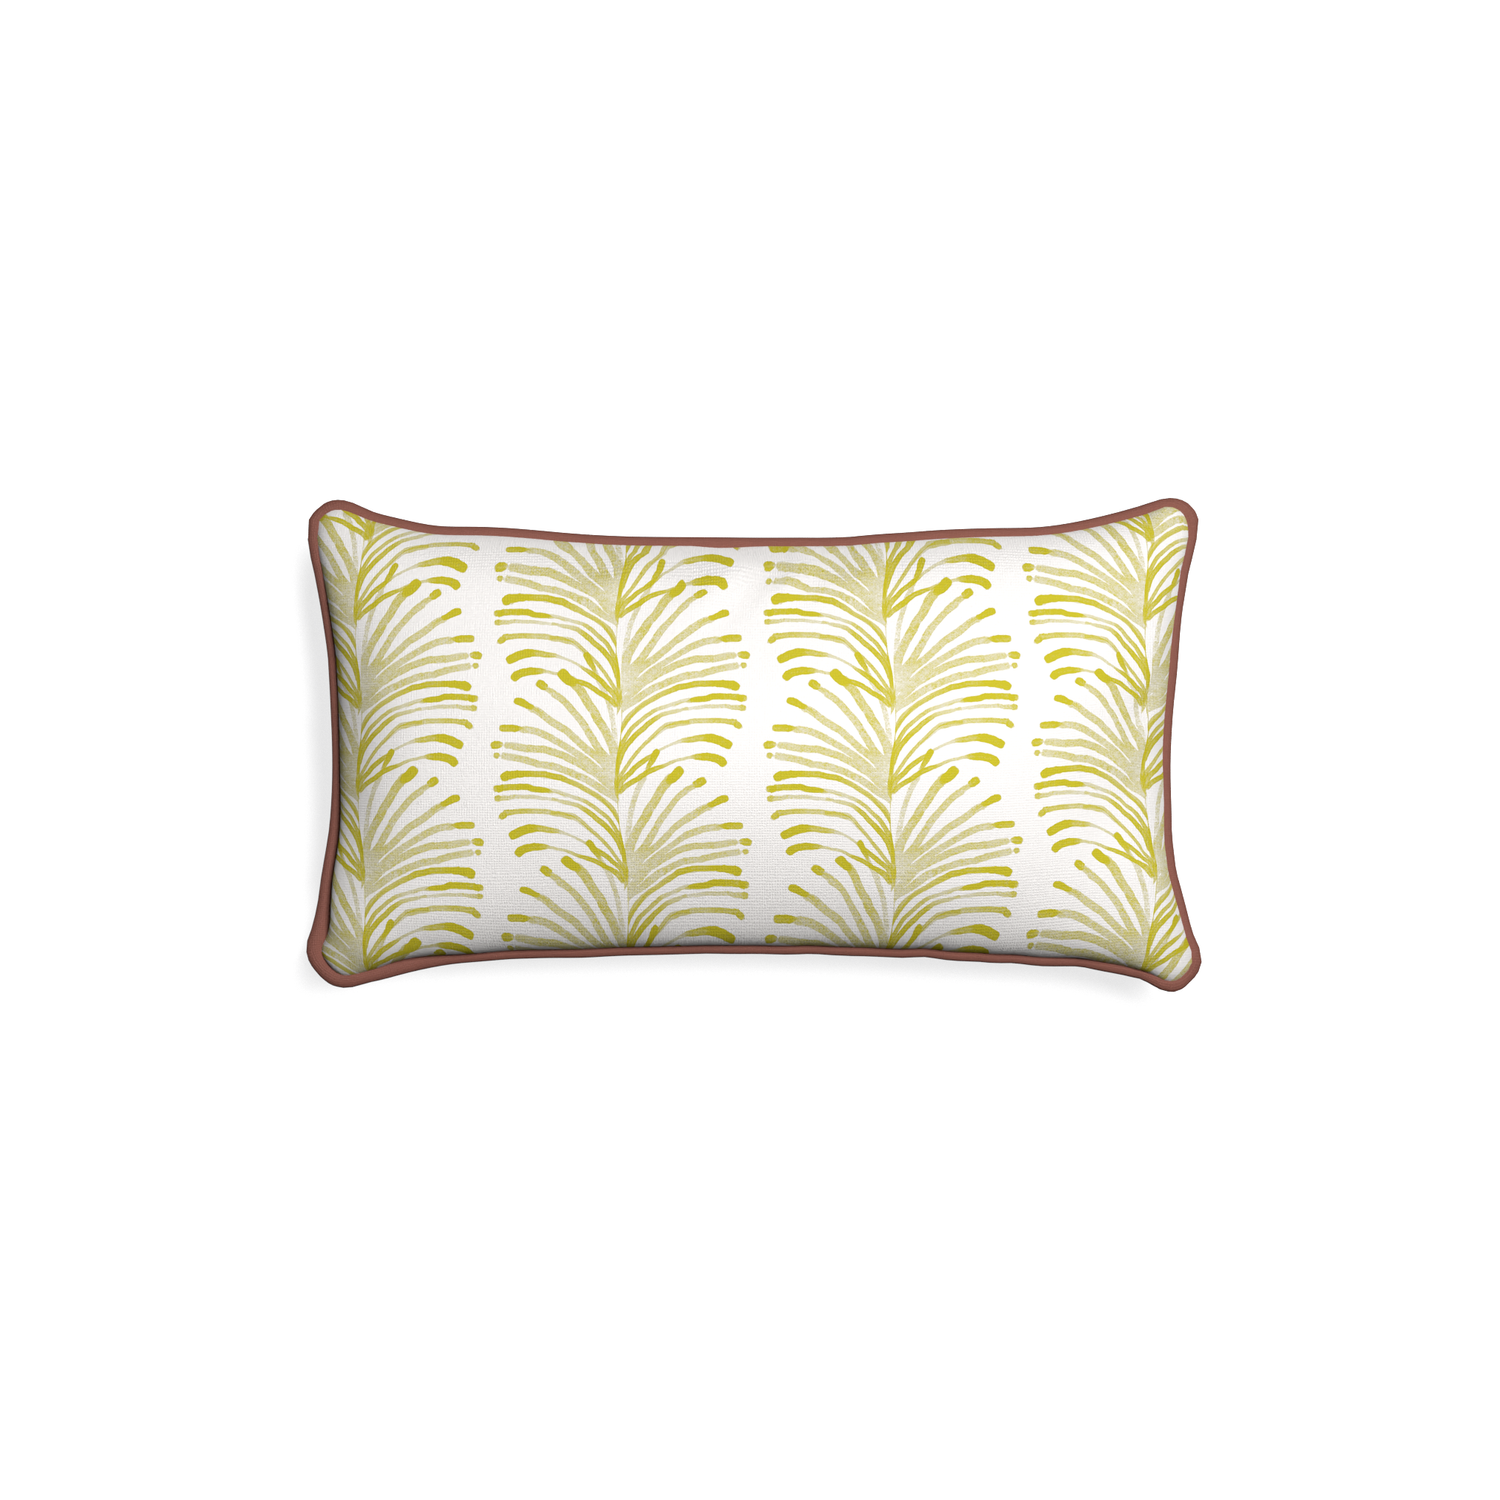 Petite-lumbar emma chartreuse custom yellow stripe chartreusepillow with w piping on white background